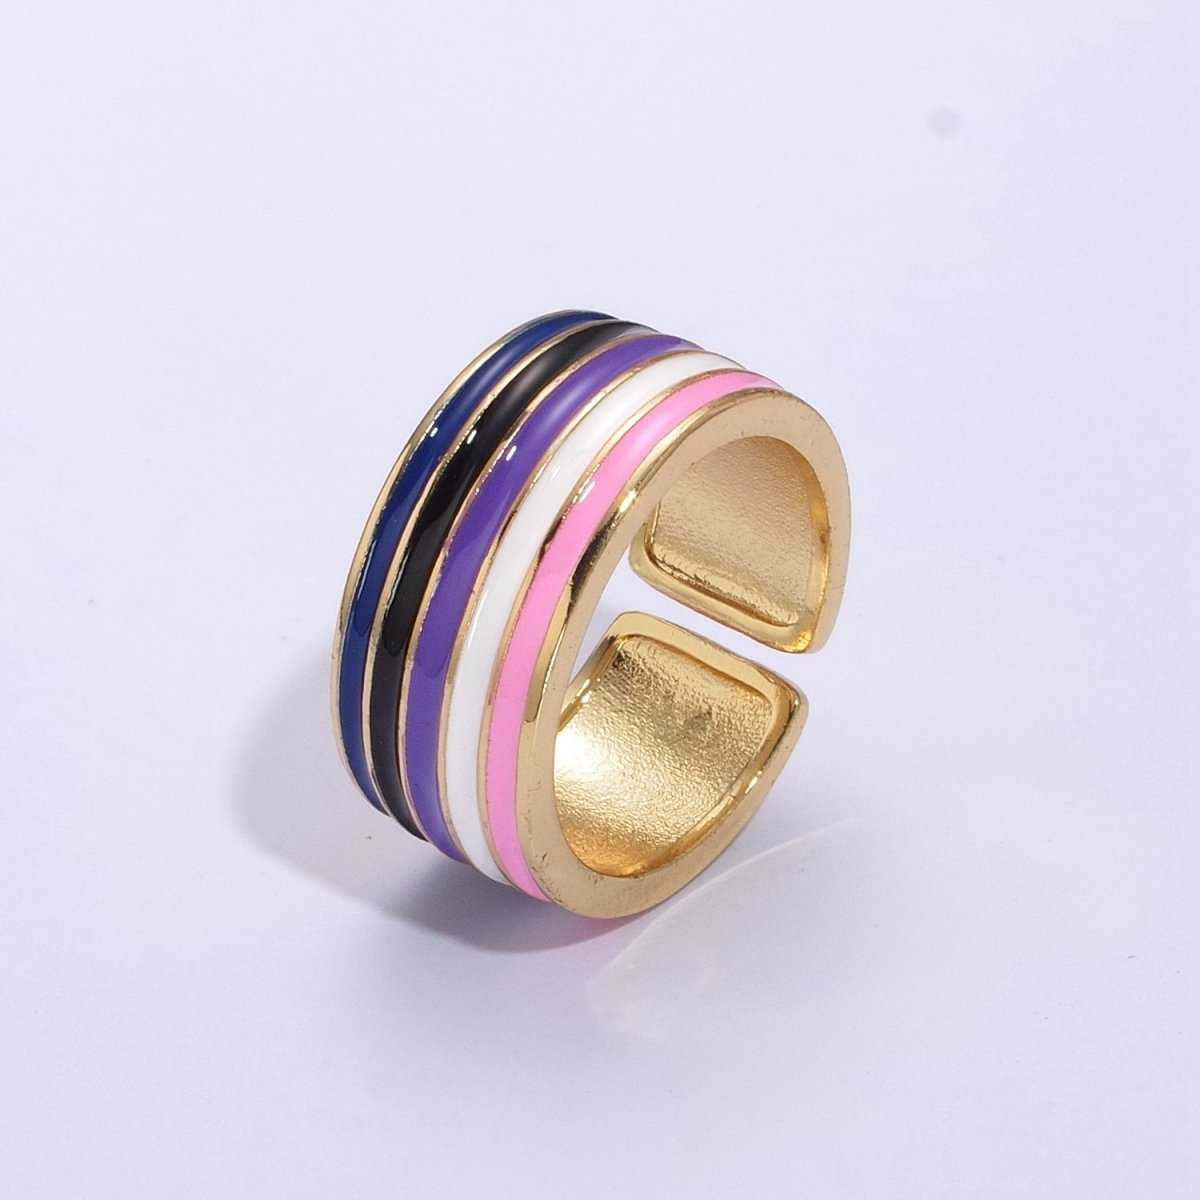 Pride Flag Rings LGBTQ Ring Gold Filled Open Adjustable Stackable Ring Trans Gay Pansexual Nonbinary Non Binary Bisexual Genderfluid Asexual Genderqueer U-061~U-068 - DLUXCA